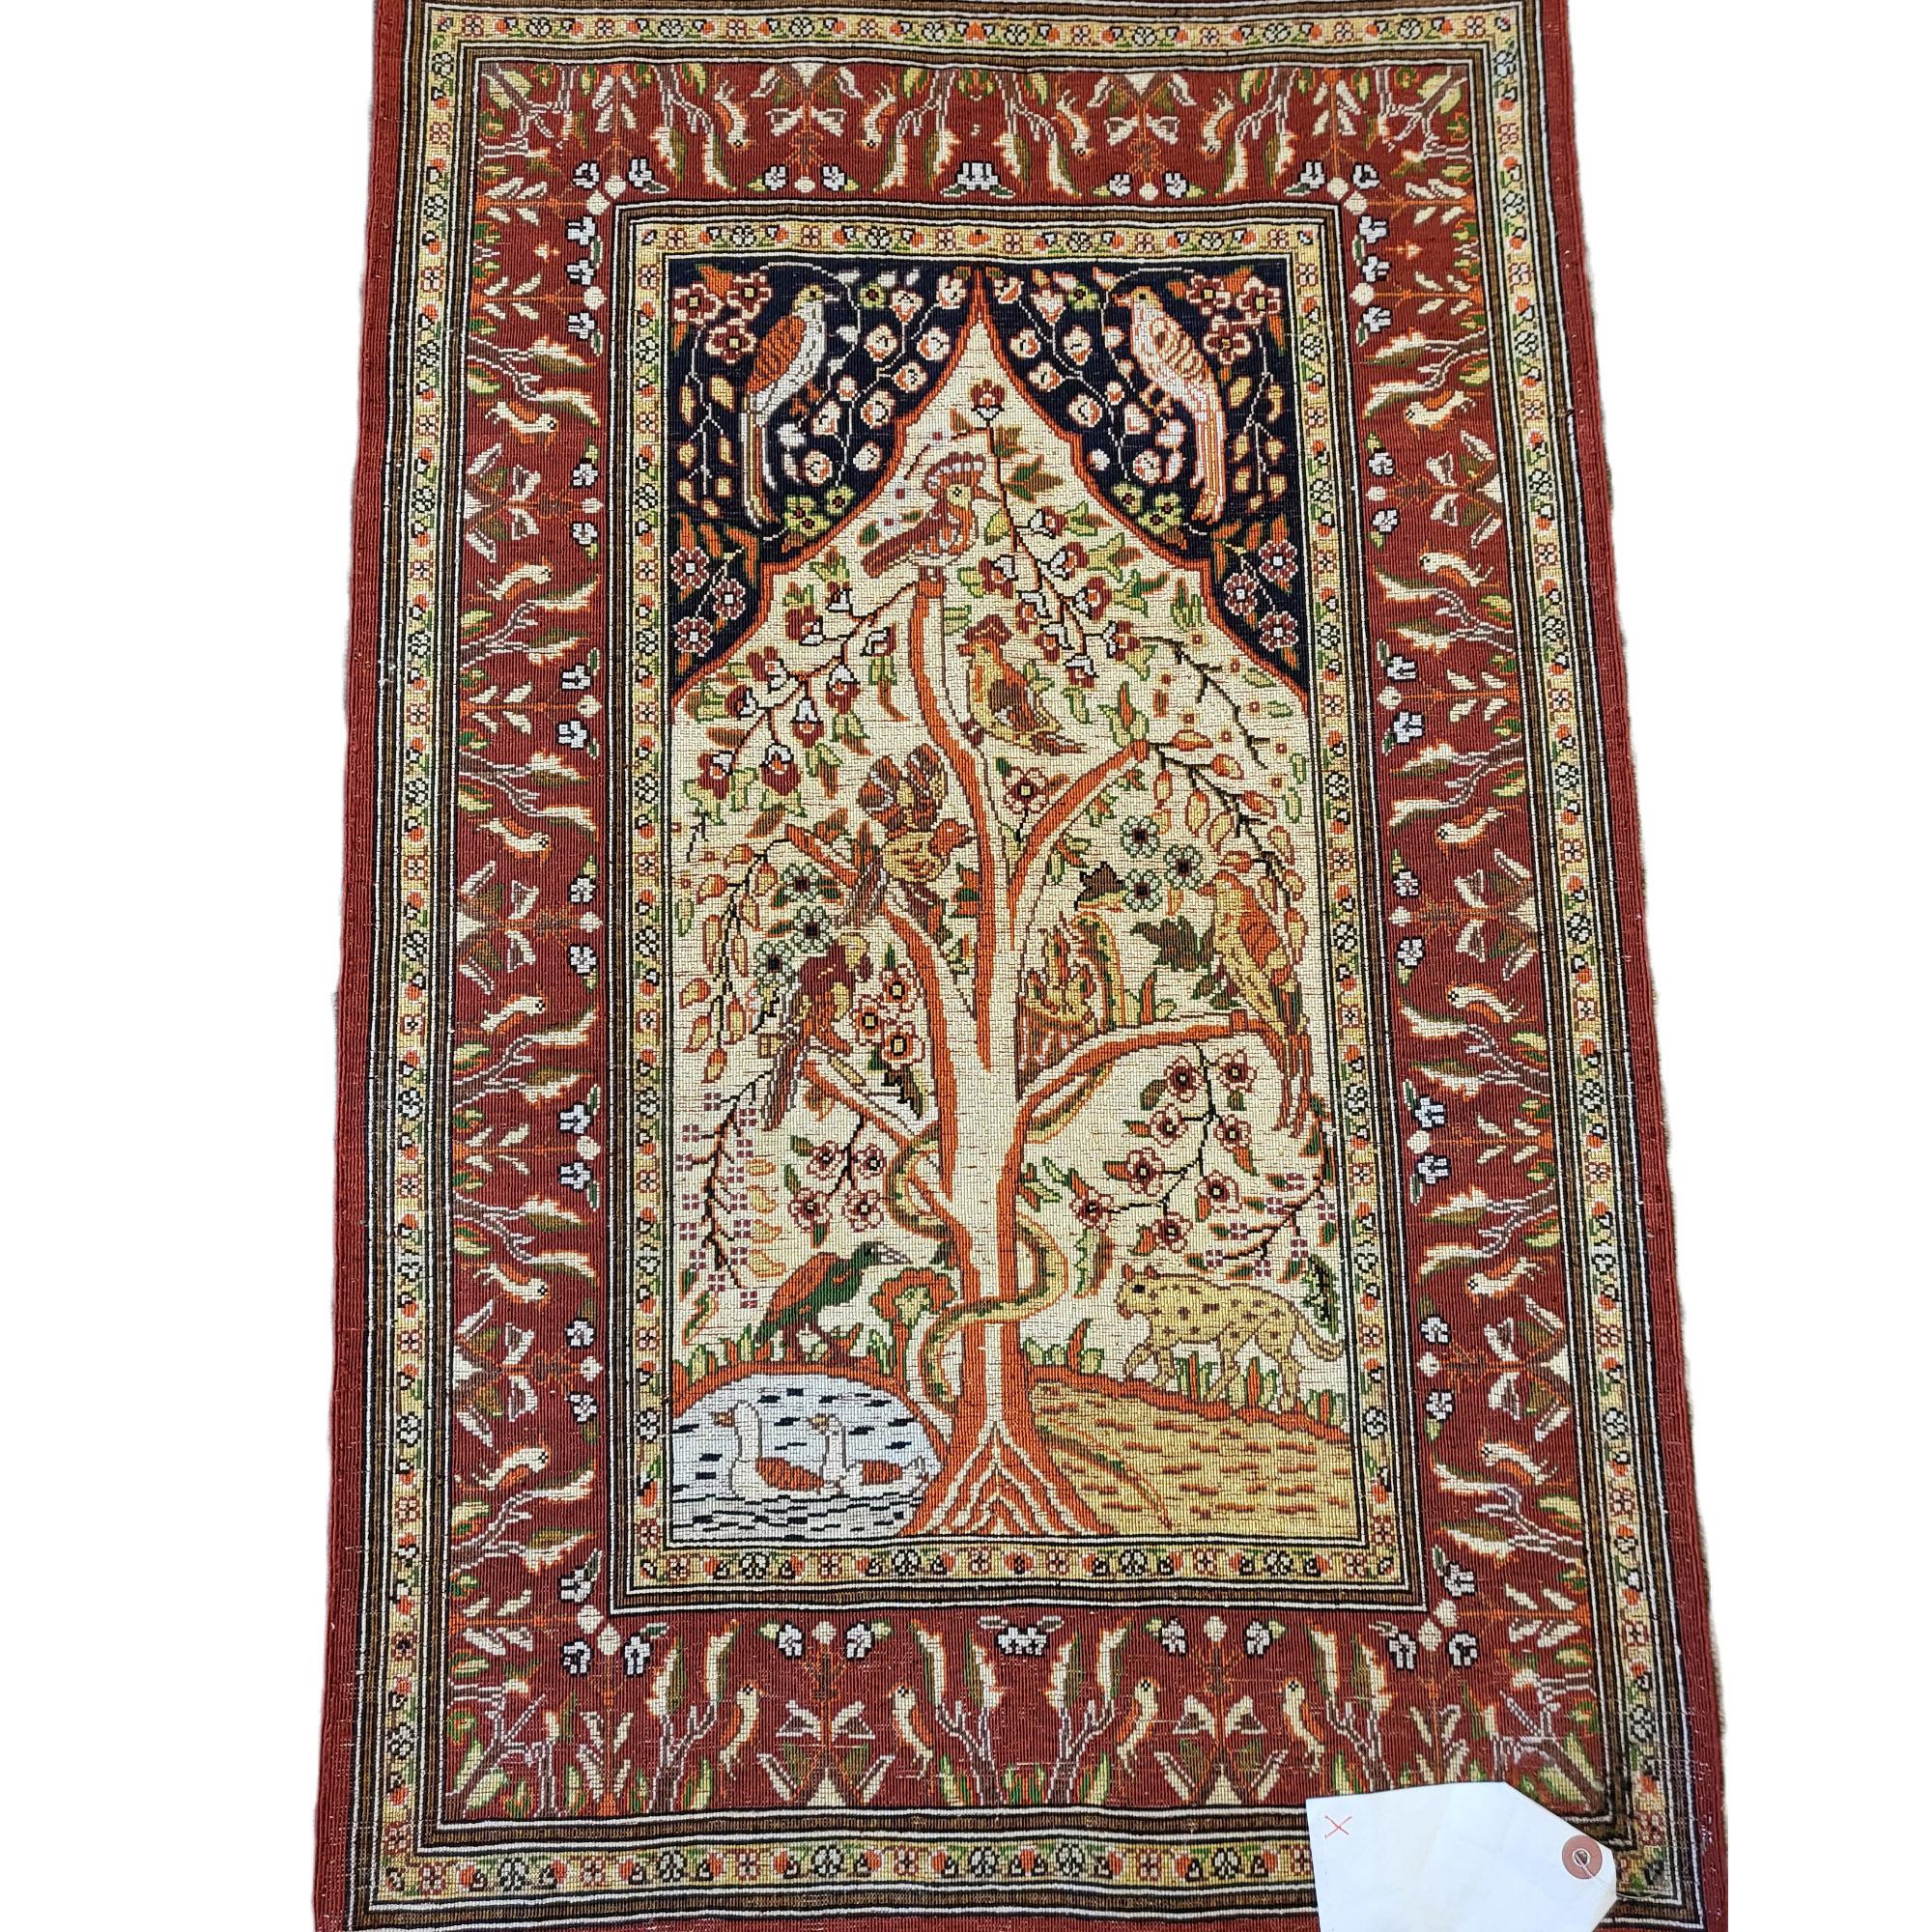 Immaculate hand woven, pure silk, antique Hereke.

Tree of life Herekes are immensely collectible. Antiques in this condition are no exception!

The colors are rich and radiant. The gold background is actually uncommon for the era, and compliments